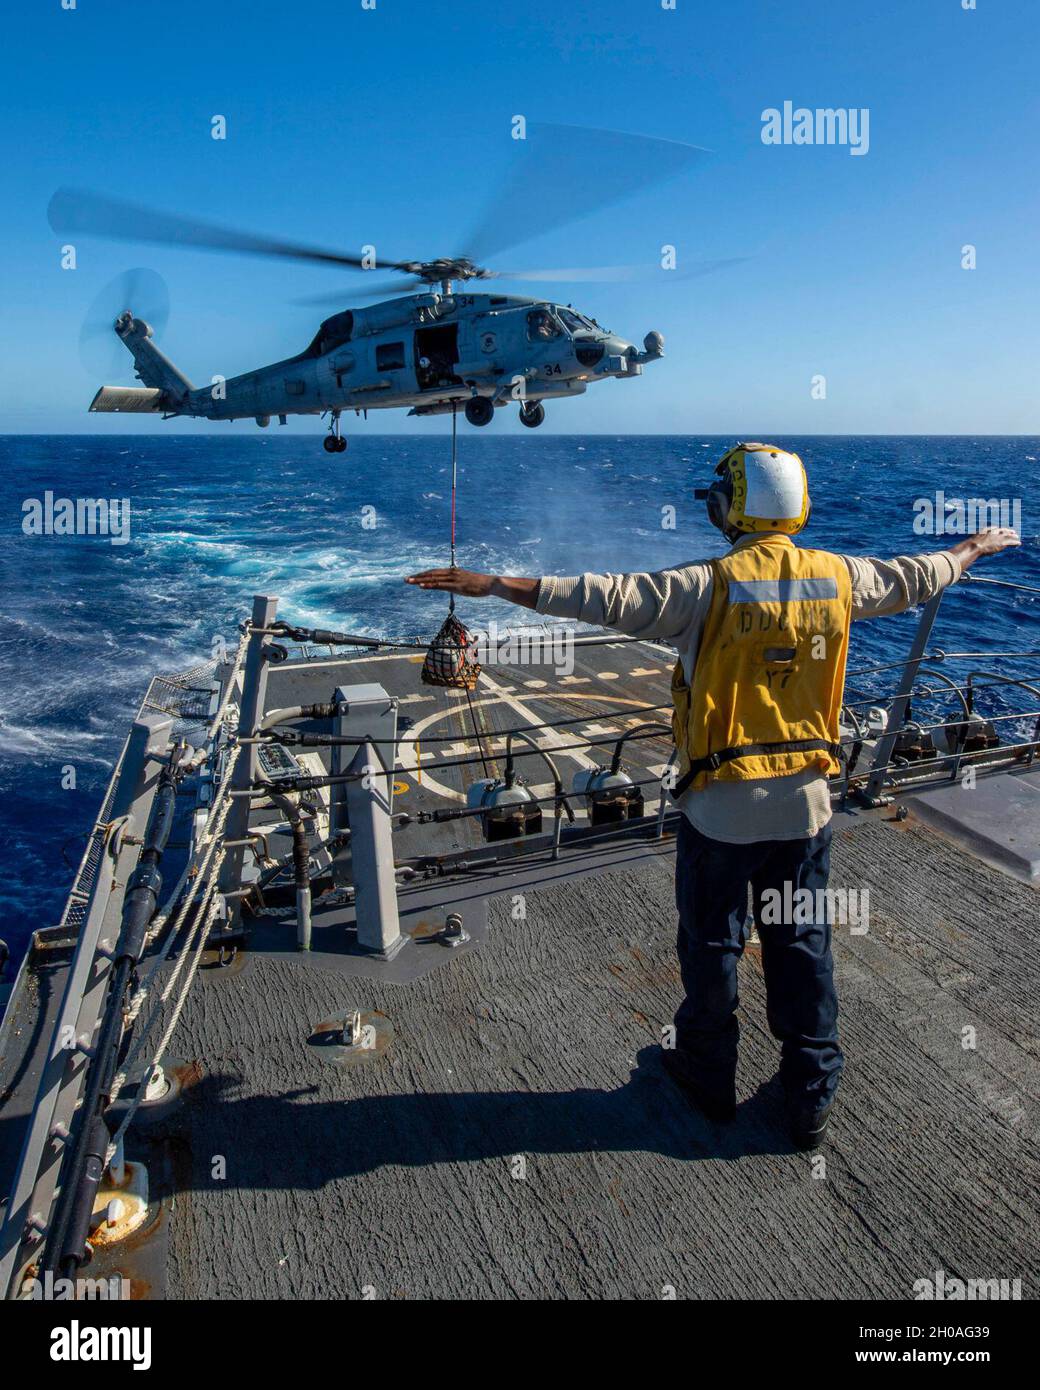 PACIFIC OCEAN (Jan. 9, 2021) U.S. Navy Boatswain’s Mate Seaman Javough Watson, from Plainfield, N.J., signals the pilot of an MH-60R Sea Hawk, assigned to the “Magicians” of Helicopter Maritime Strike Squadron (HSM) 35, to lower supplies to the flight deck of the Arleigh Burke-class guided-missile destroyer USS John Finn (DDG 113) Jan. 9, 2021. John Finn, part of the Theodore Roosevelt Carrier Strike Group, is on a scheduled deployment to the U.S. 7th Fleet area of operations. As the U.S. Navy’s largest forward deployed fleet, with its approximate 50-70 ships and submarines, 140 aircraft, and Stock Photo